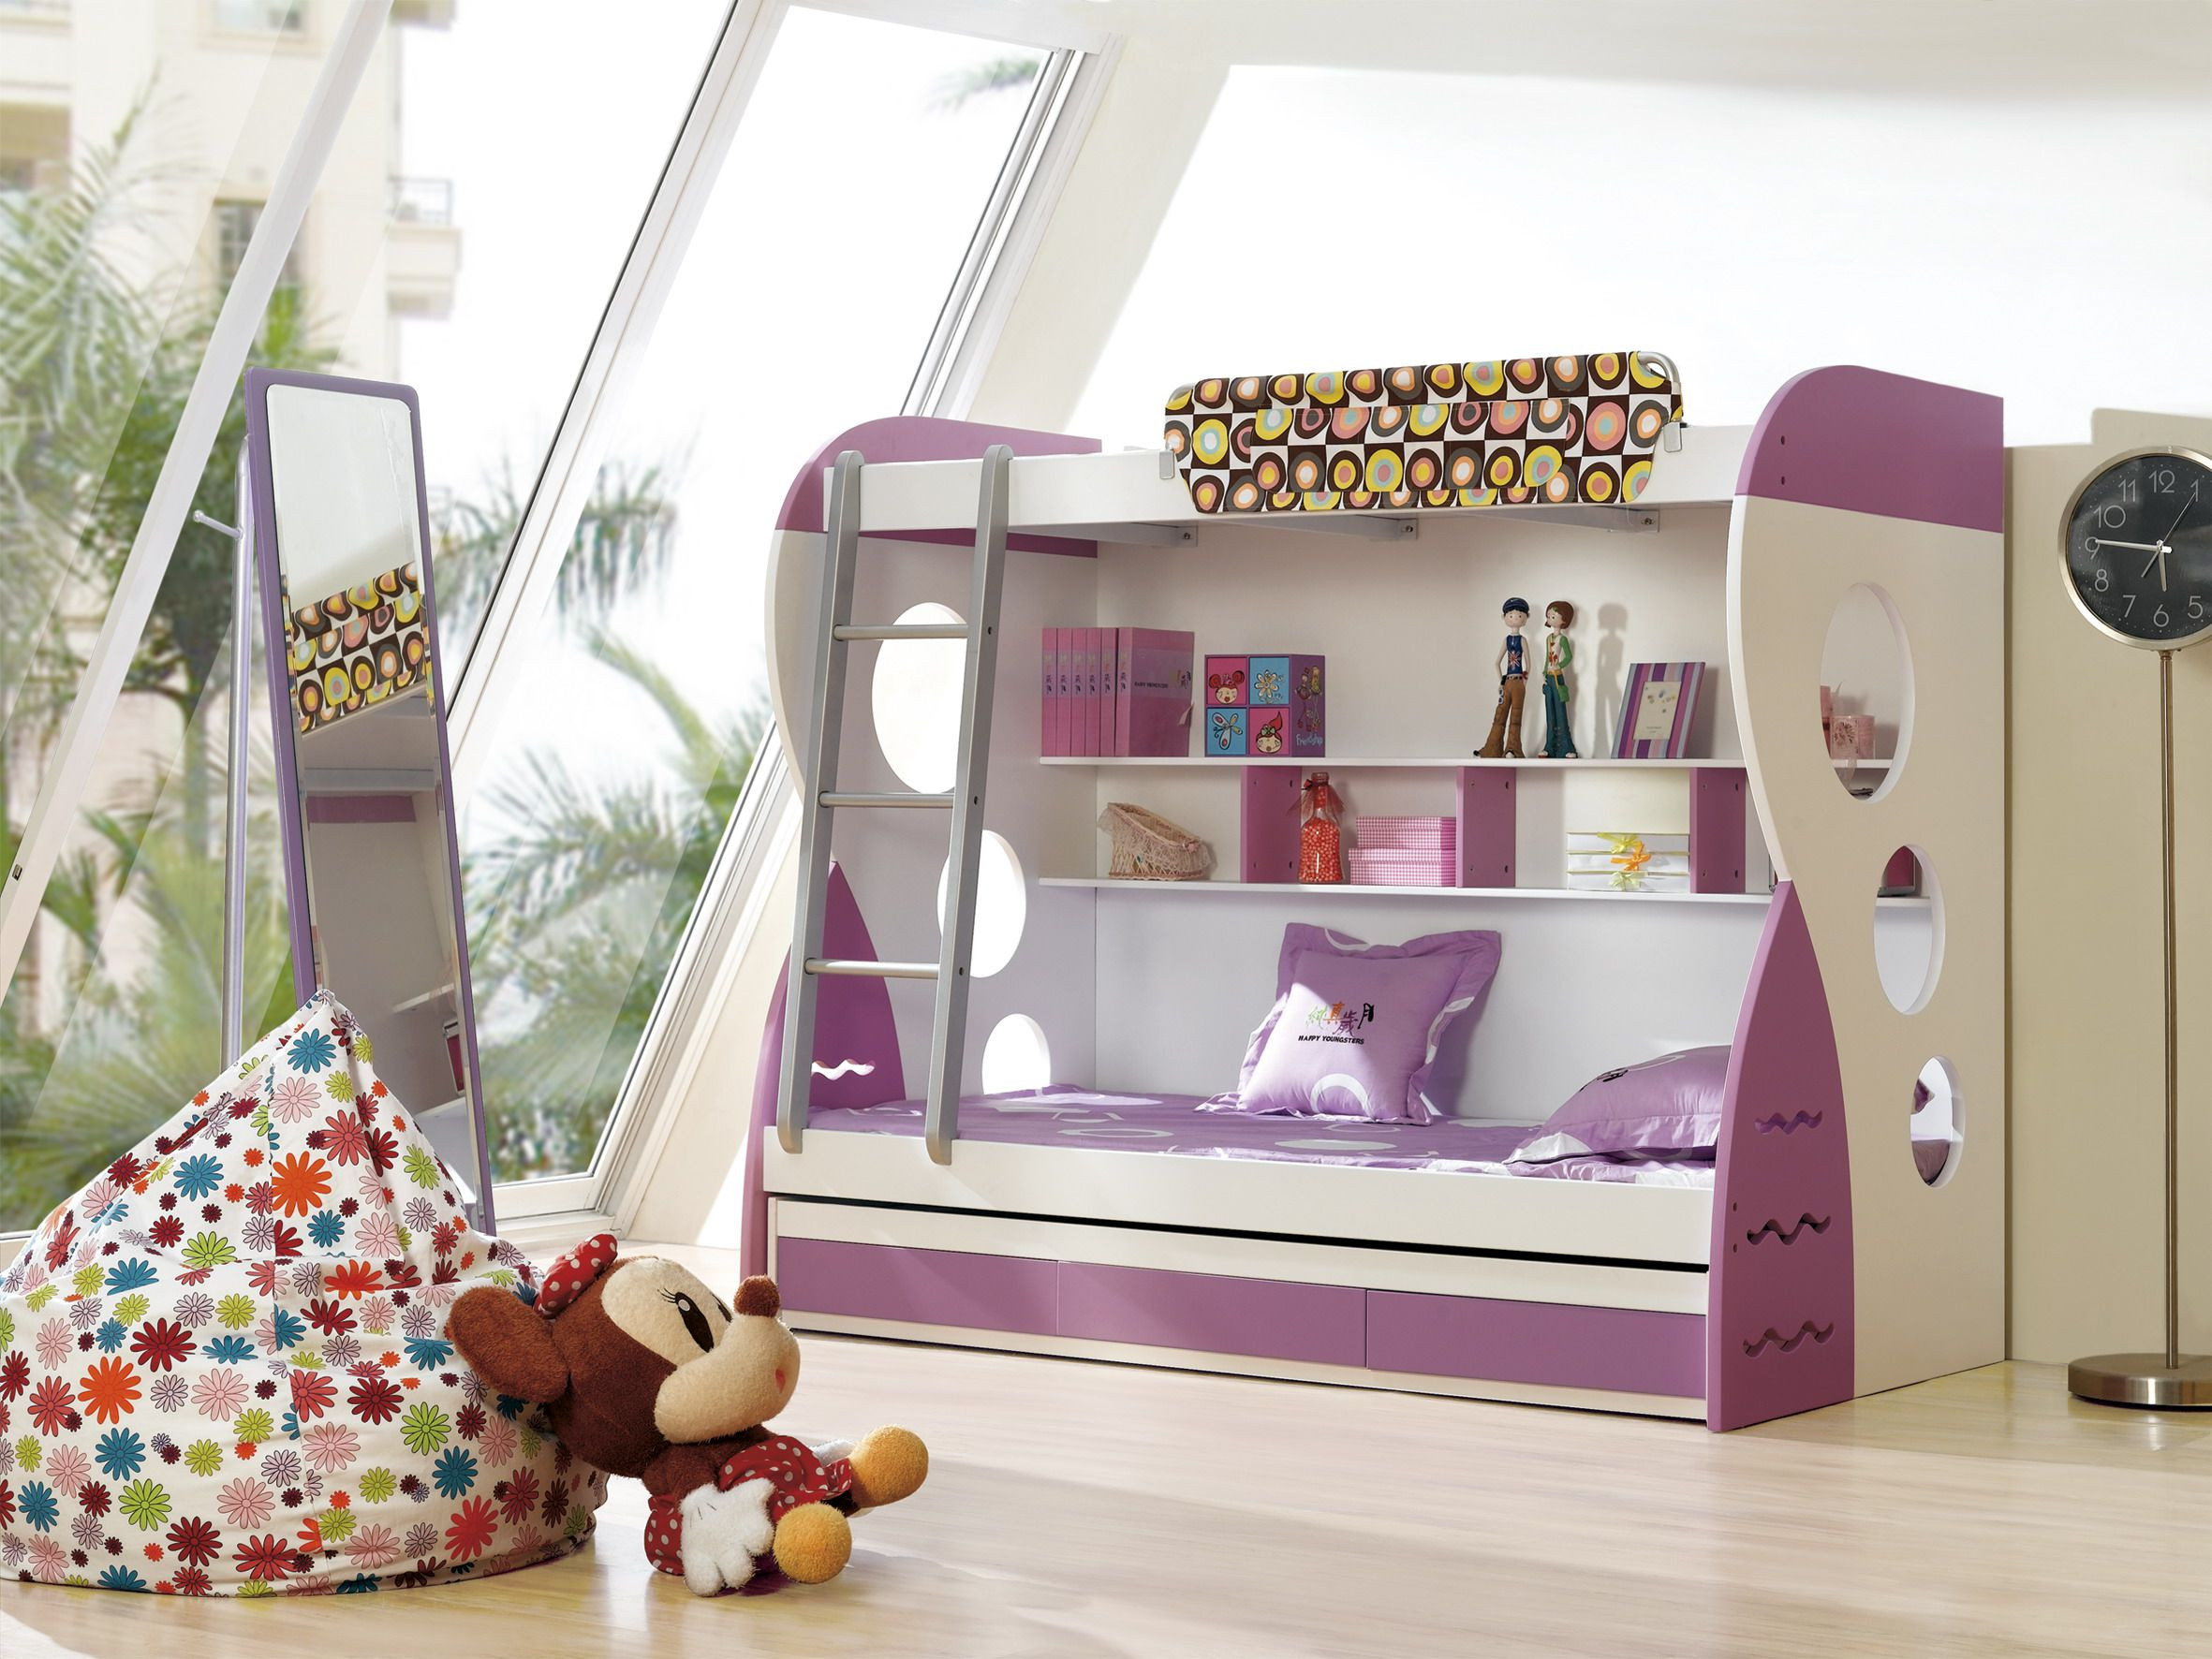 Bunk Bed Girl Bedroom Ideas
 Girly Bunk Beds for Kids and Teenagers MidCityEast